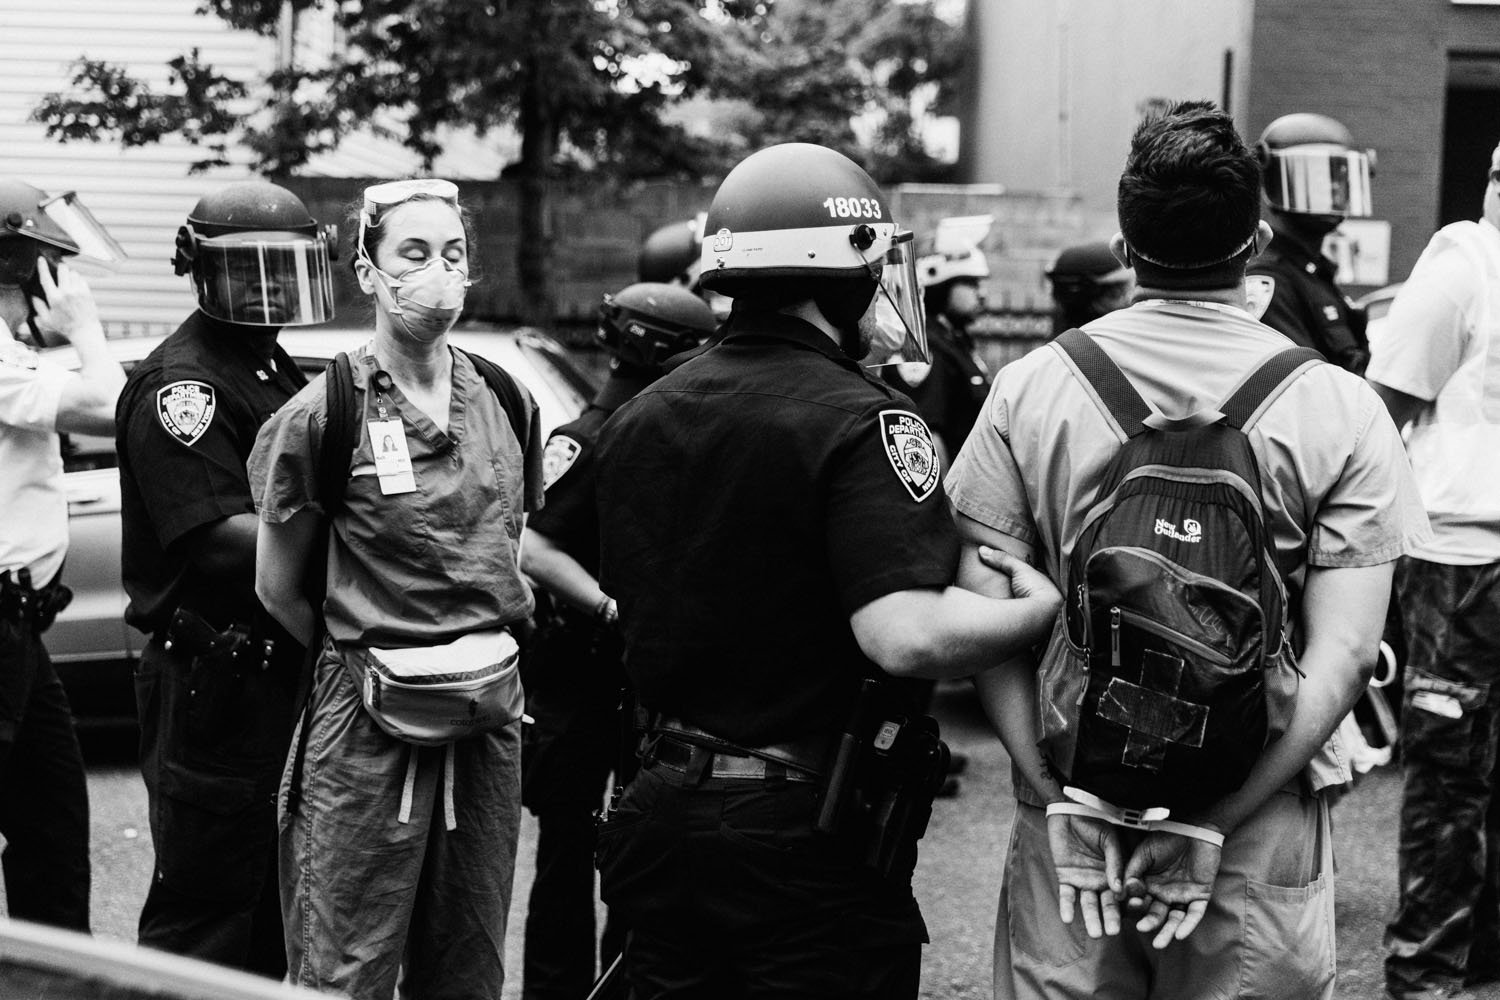 The New York Police Department’s response to a Mott Haven protest last June has been condemned by Human Rights Watch. A new report, which compiles dozens of interviews, videos and analysis of what happened that night, details the protest and hundreds of arrests..